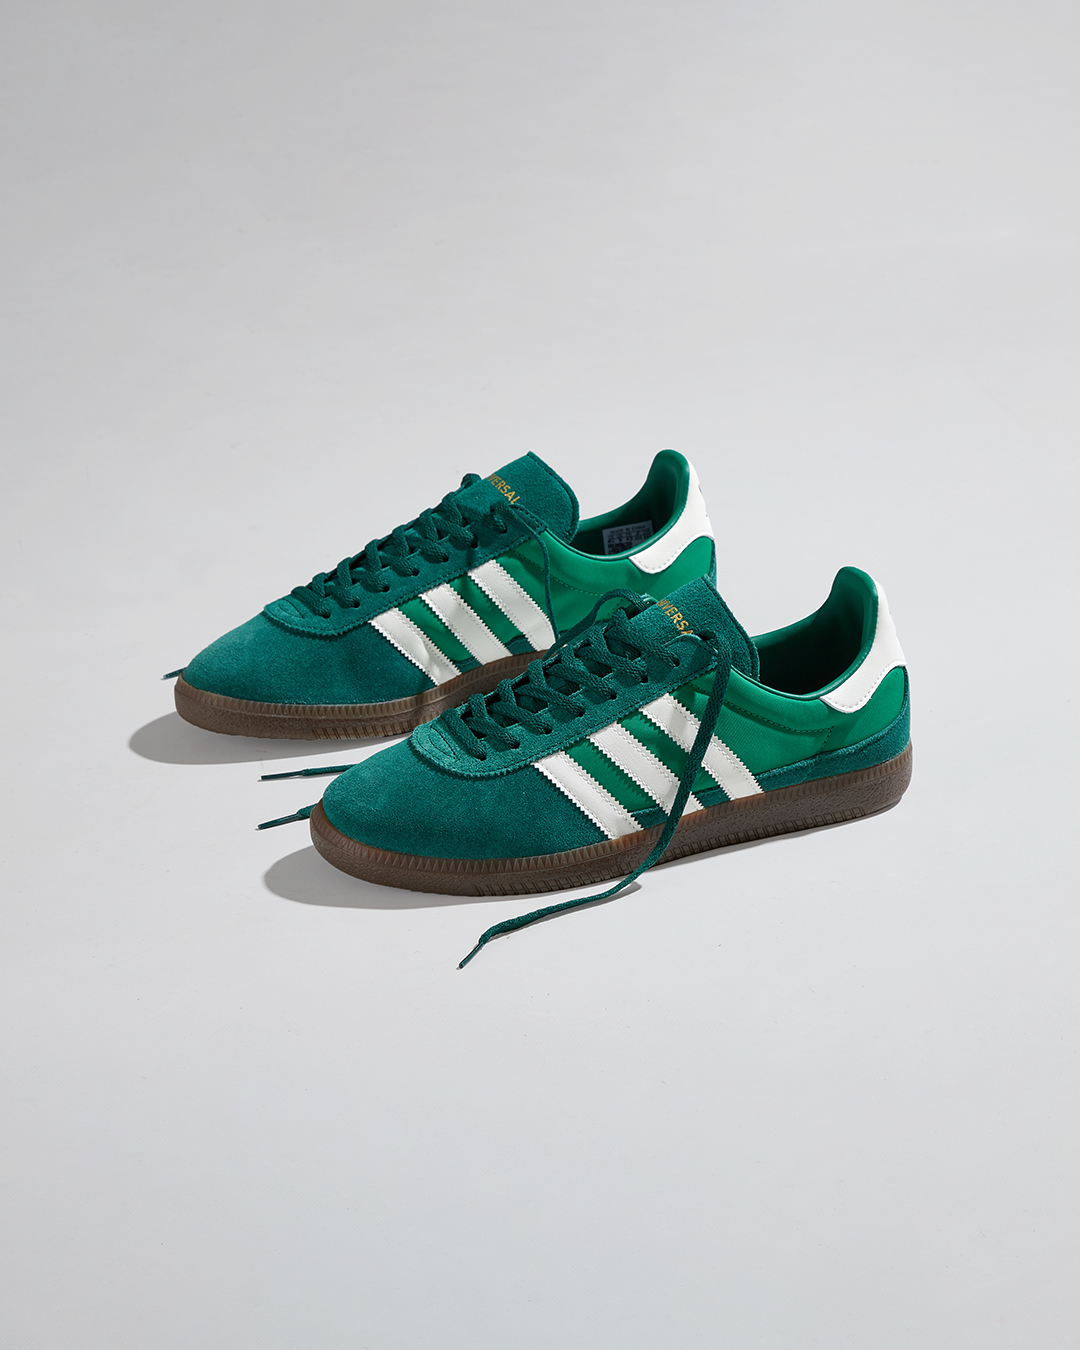 Higgins Overleg Kiwi Aphrodite Clothing on Twitter: "Mixing terrace style with plenty of retro  charm, adidas have only gone and brought back the OG adidas Universal  silhouette. Find them in-store and online now: https://t.co/0ASIo4cyJ6  https://t.co/r8LoidDnwk" /